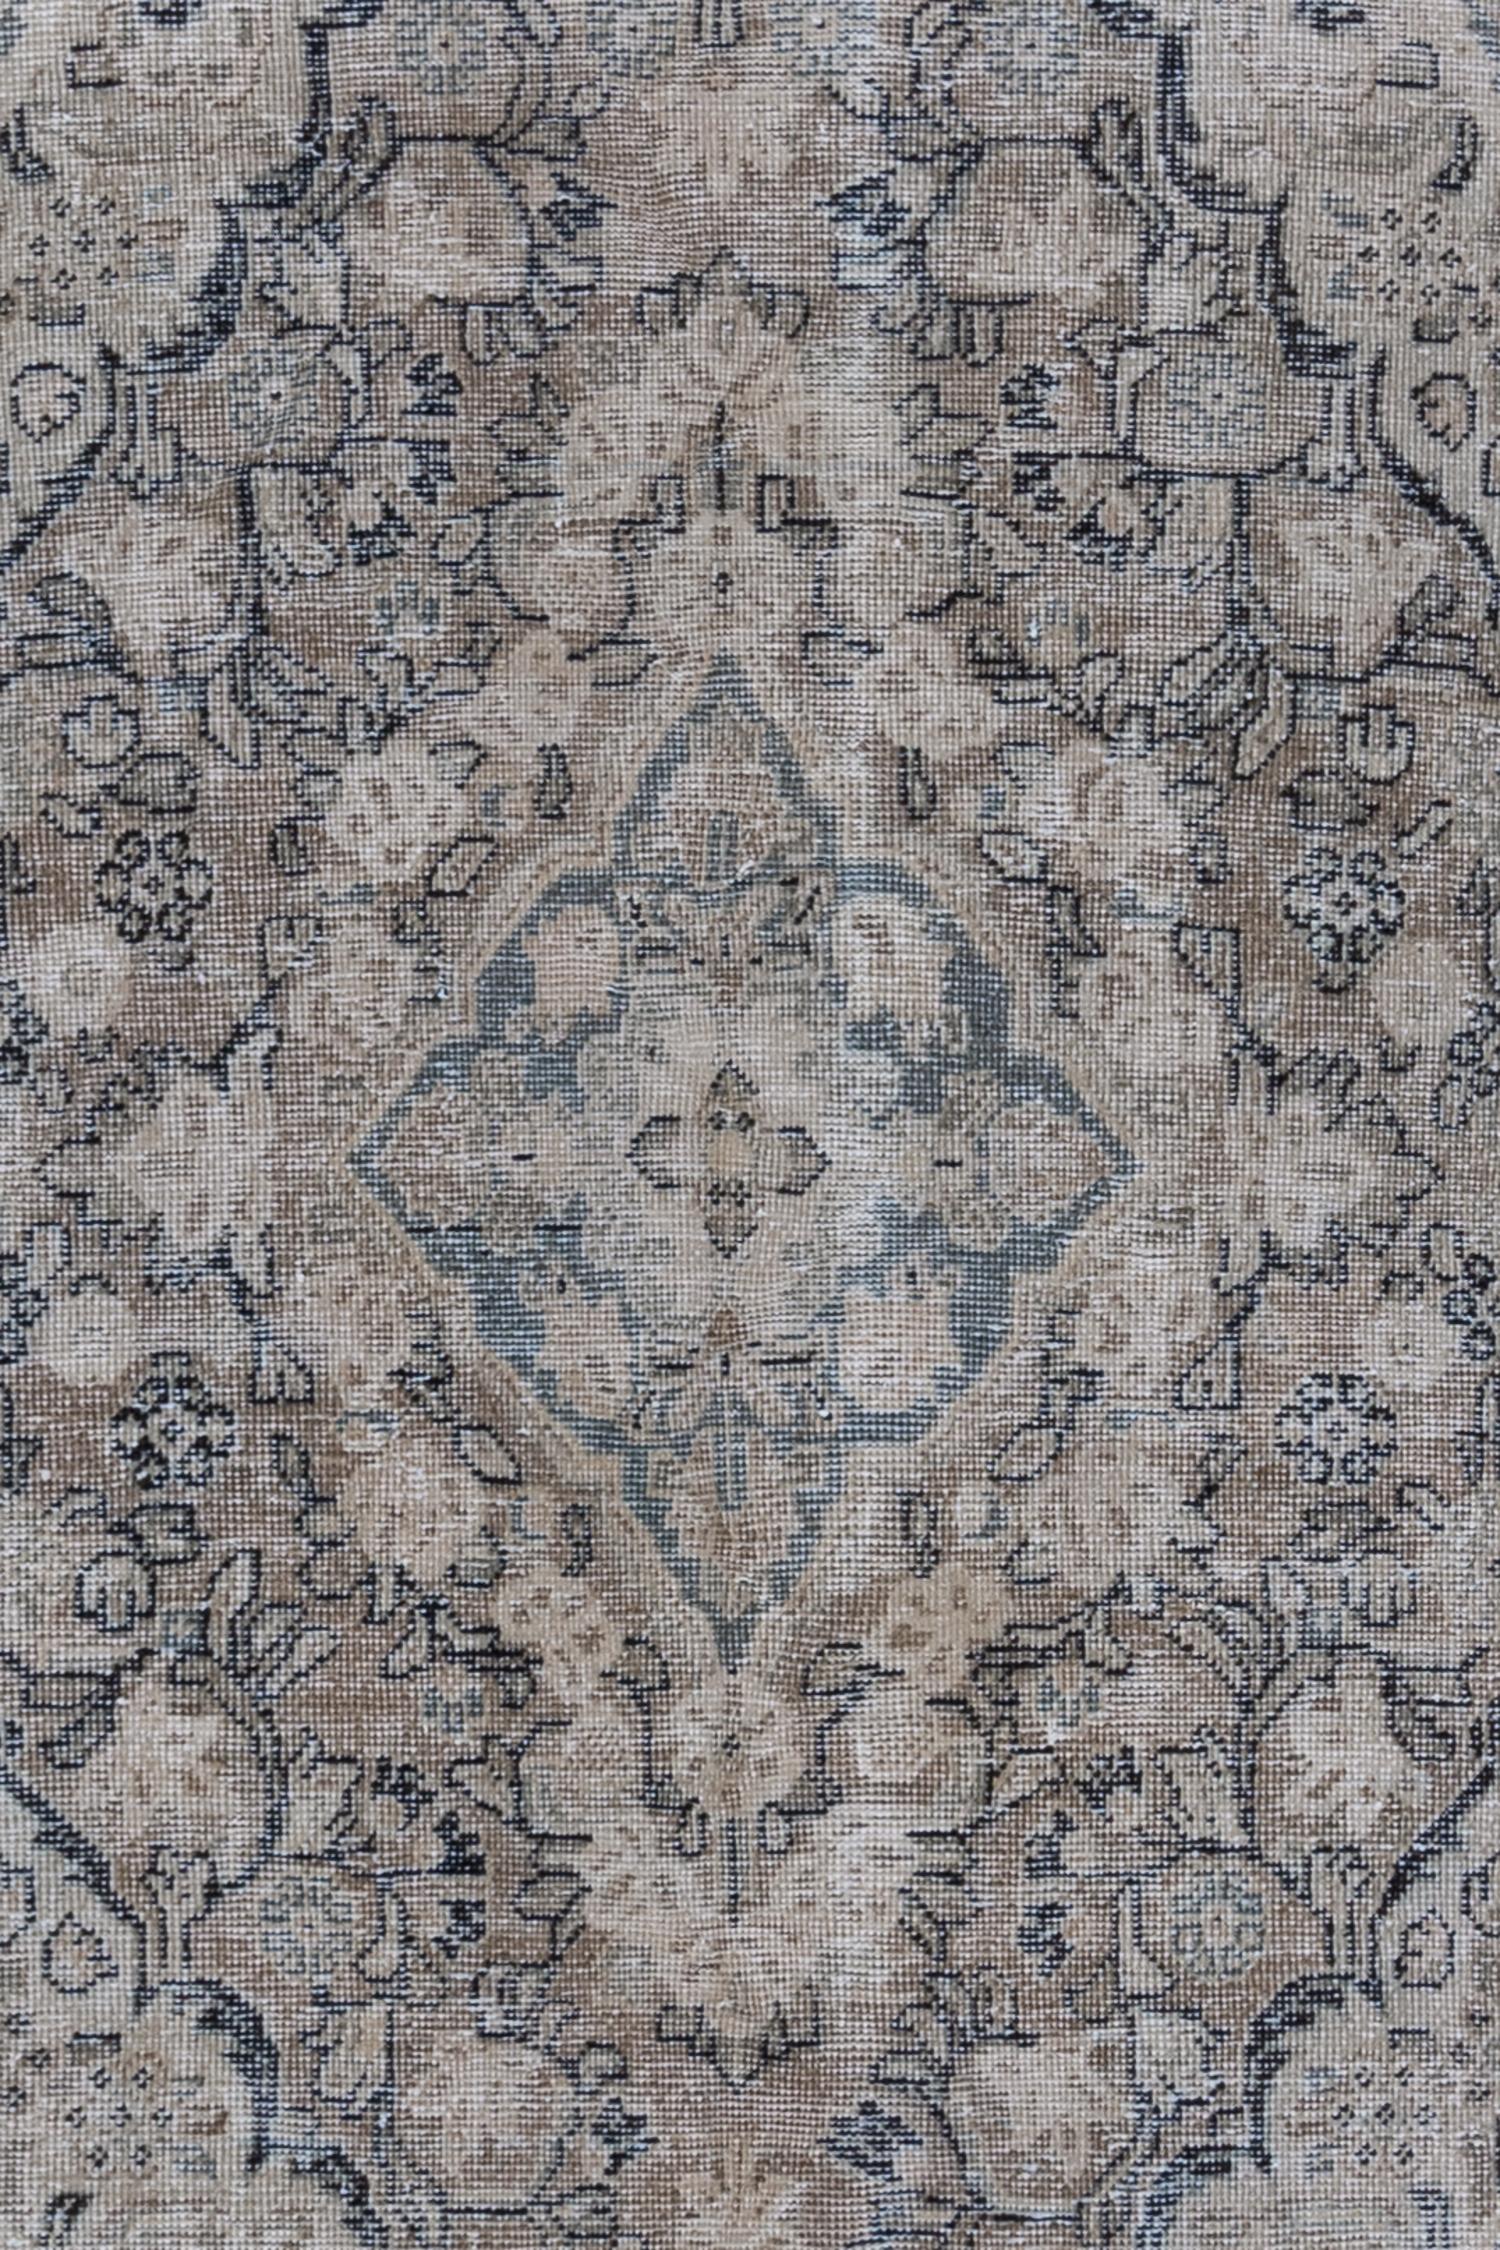 Age: Circa 1930

Colors: navy blue, blue, gray, nude

Pile: low

Wear Notes: 5-6

Material: wool on cotton 

beautiful vintage Mahal with a nude field and contrasting shades of blue and dark gray. 

Wear Guide:
Vintage and antique rugs